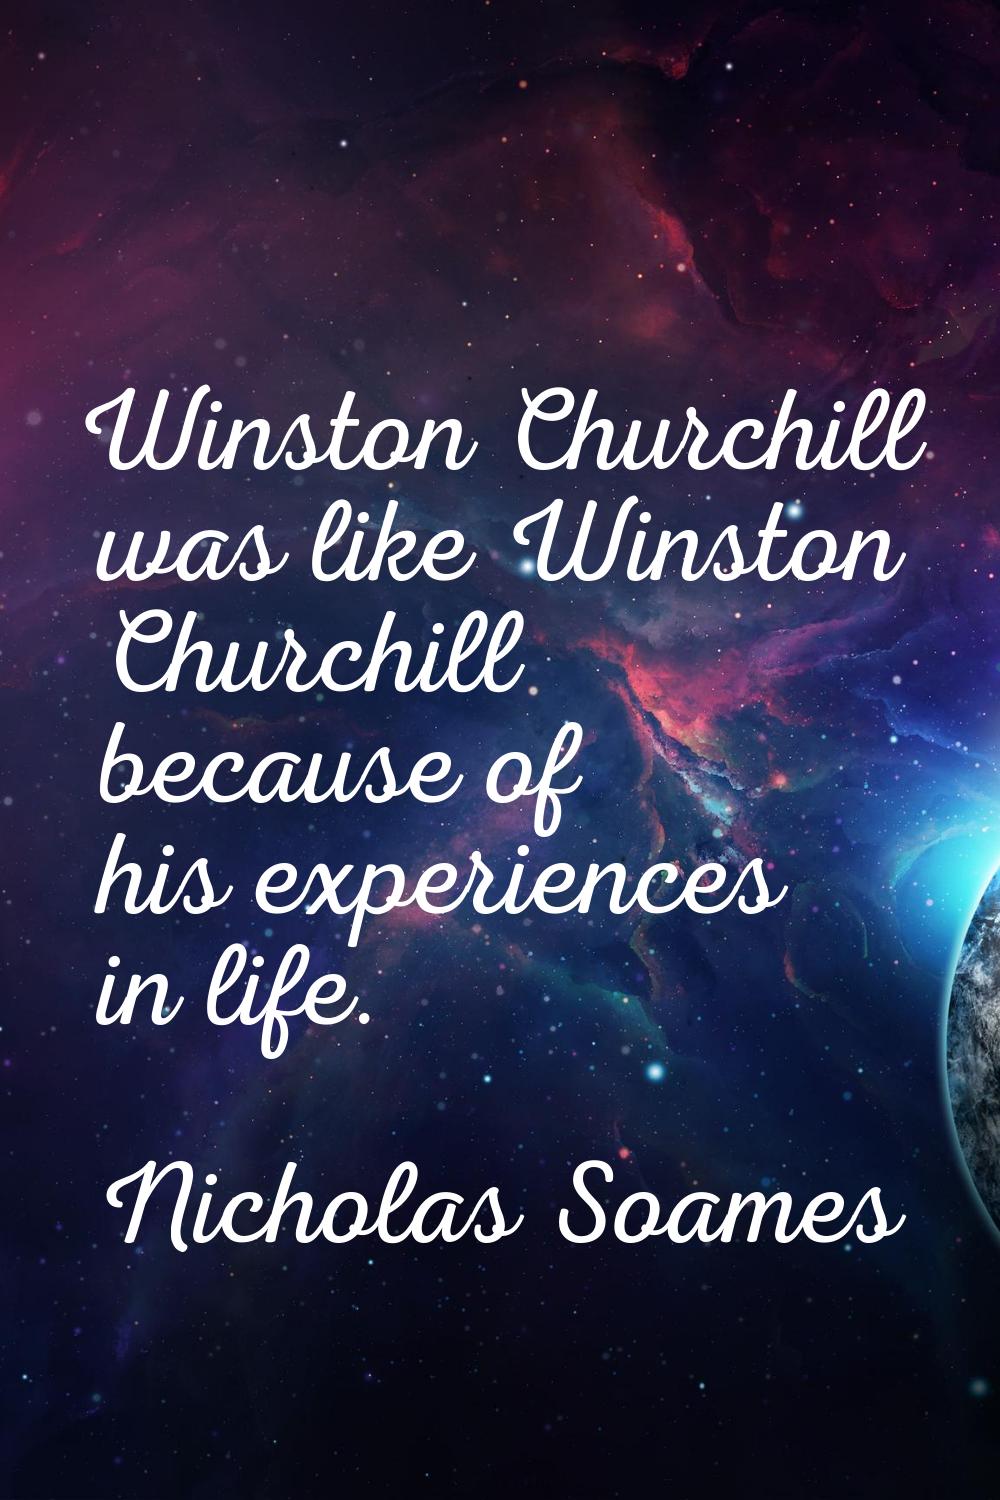 Winston Churchill was like Winston Churchill because of his experiences in life.